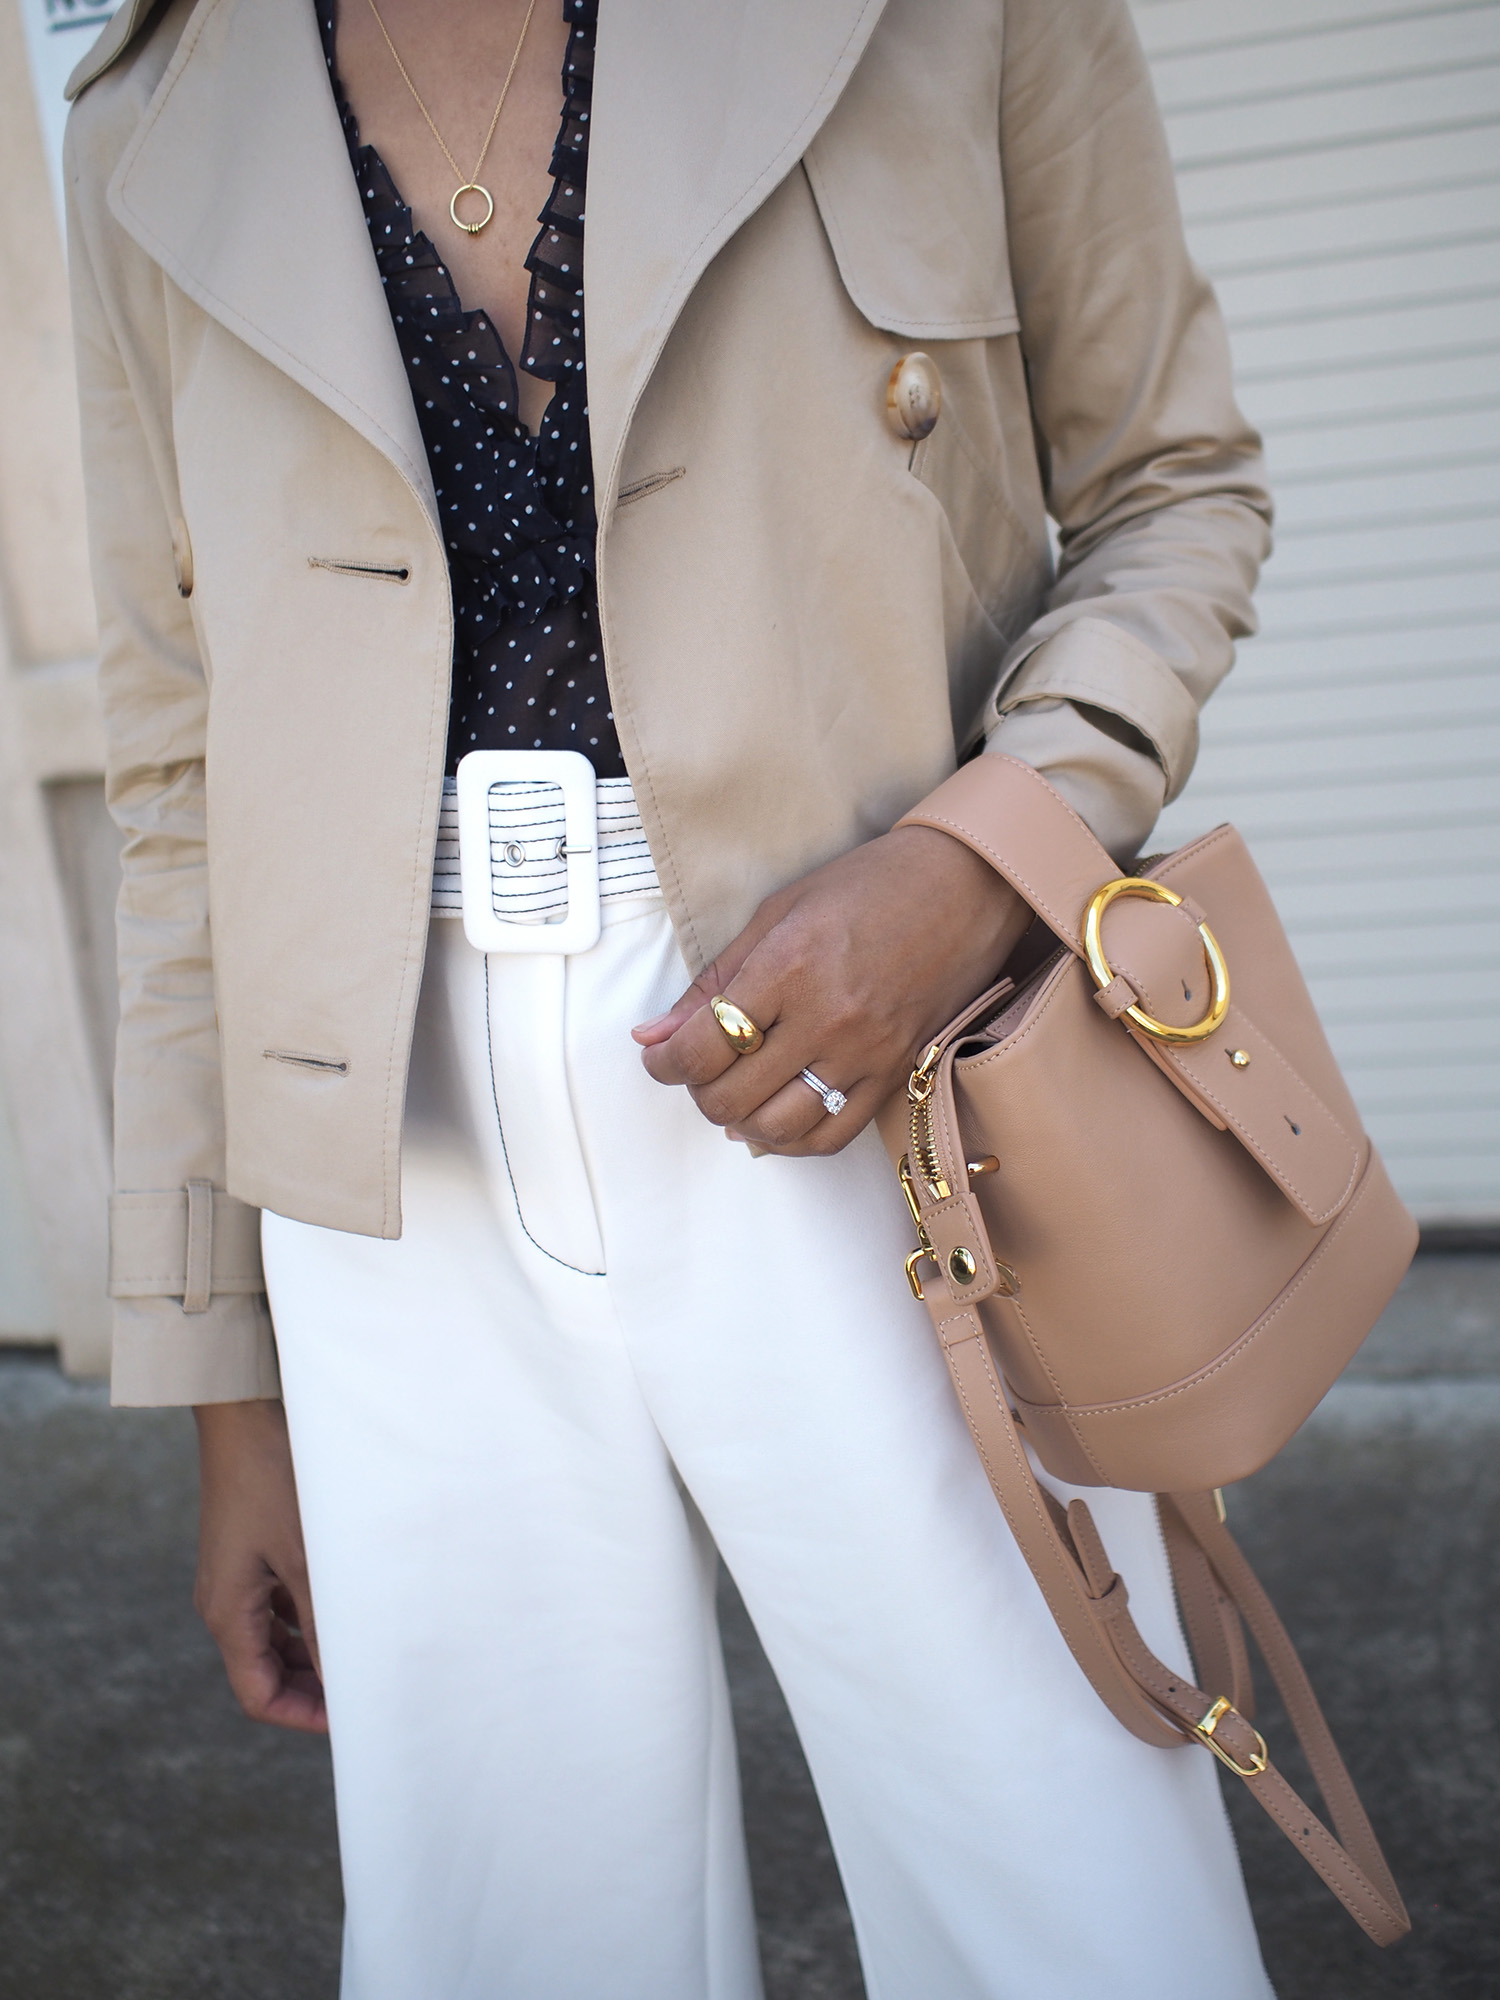 Cropped Trench